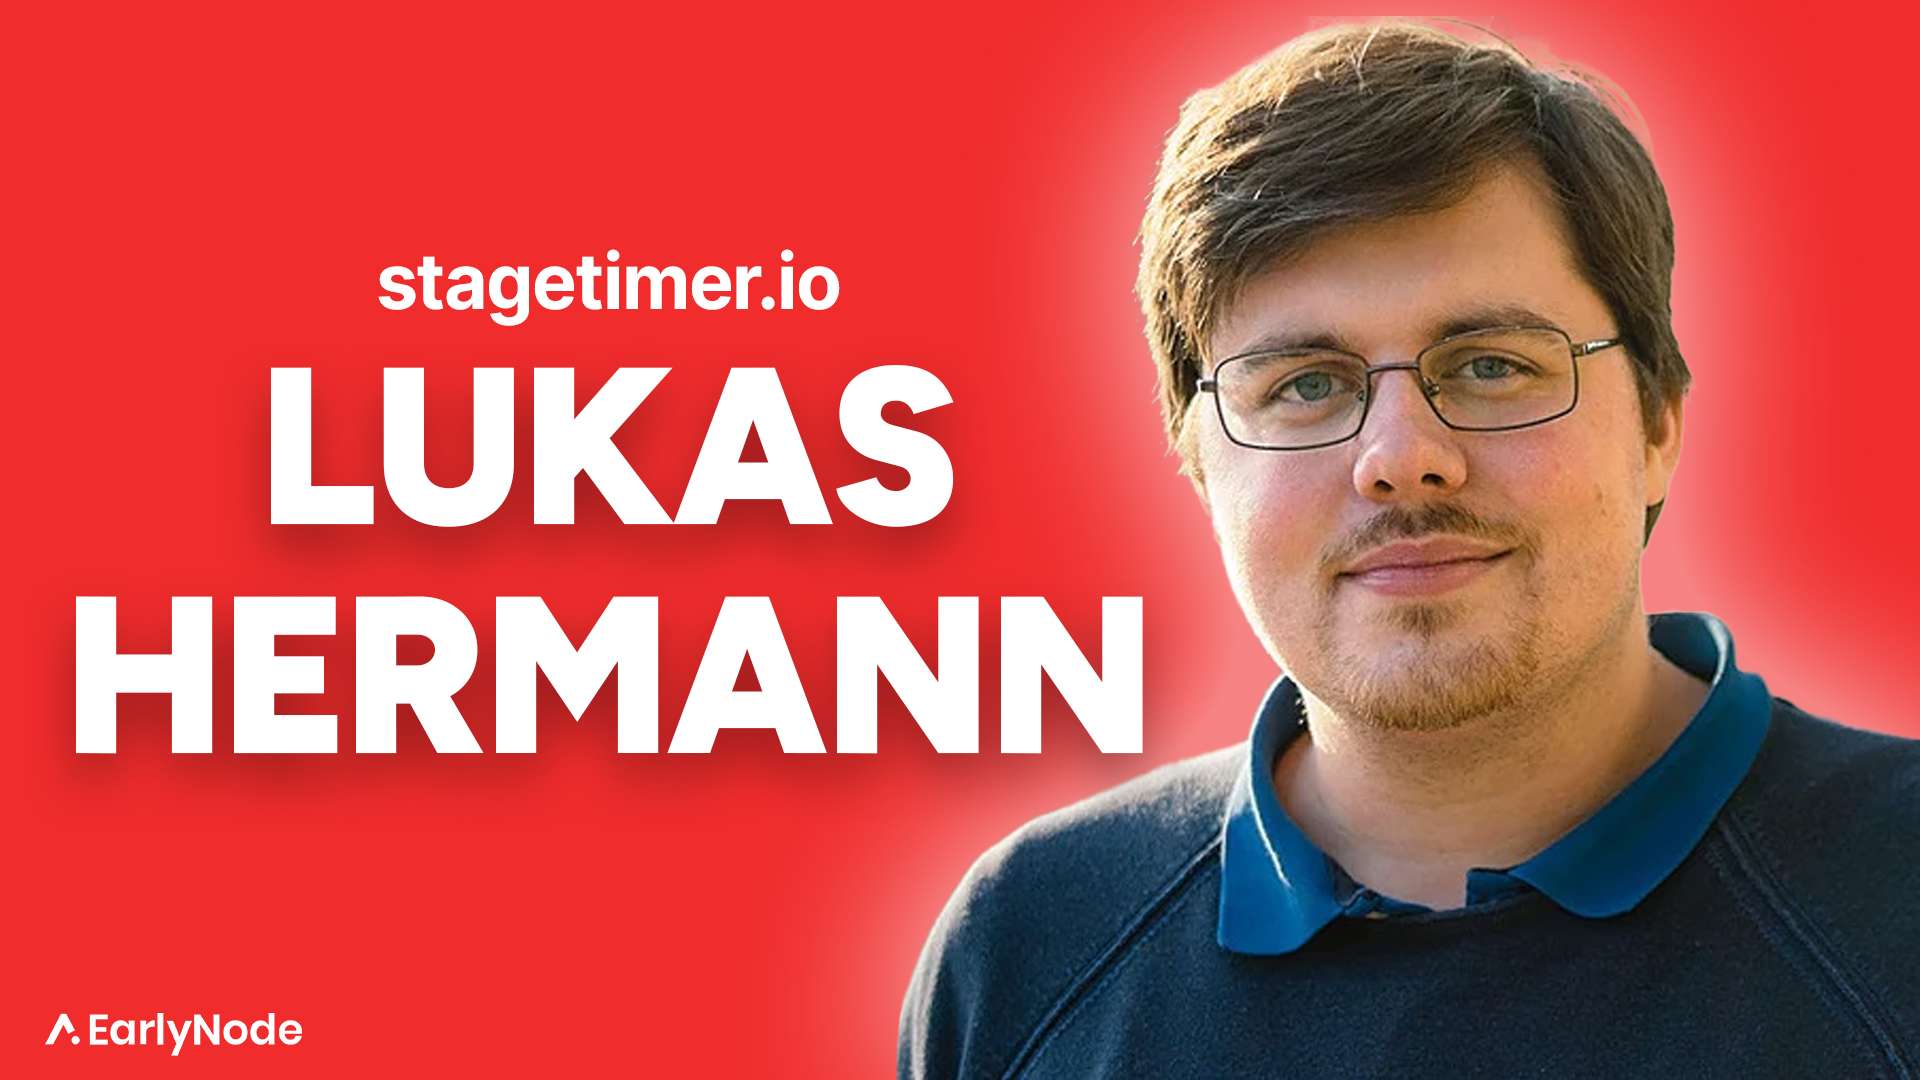 Building a Niche SaaS with your Spouse as Co-Founder, with Lukas Hermann (StageTimer.io)